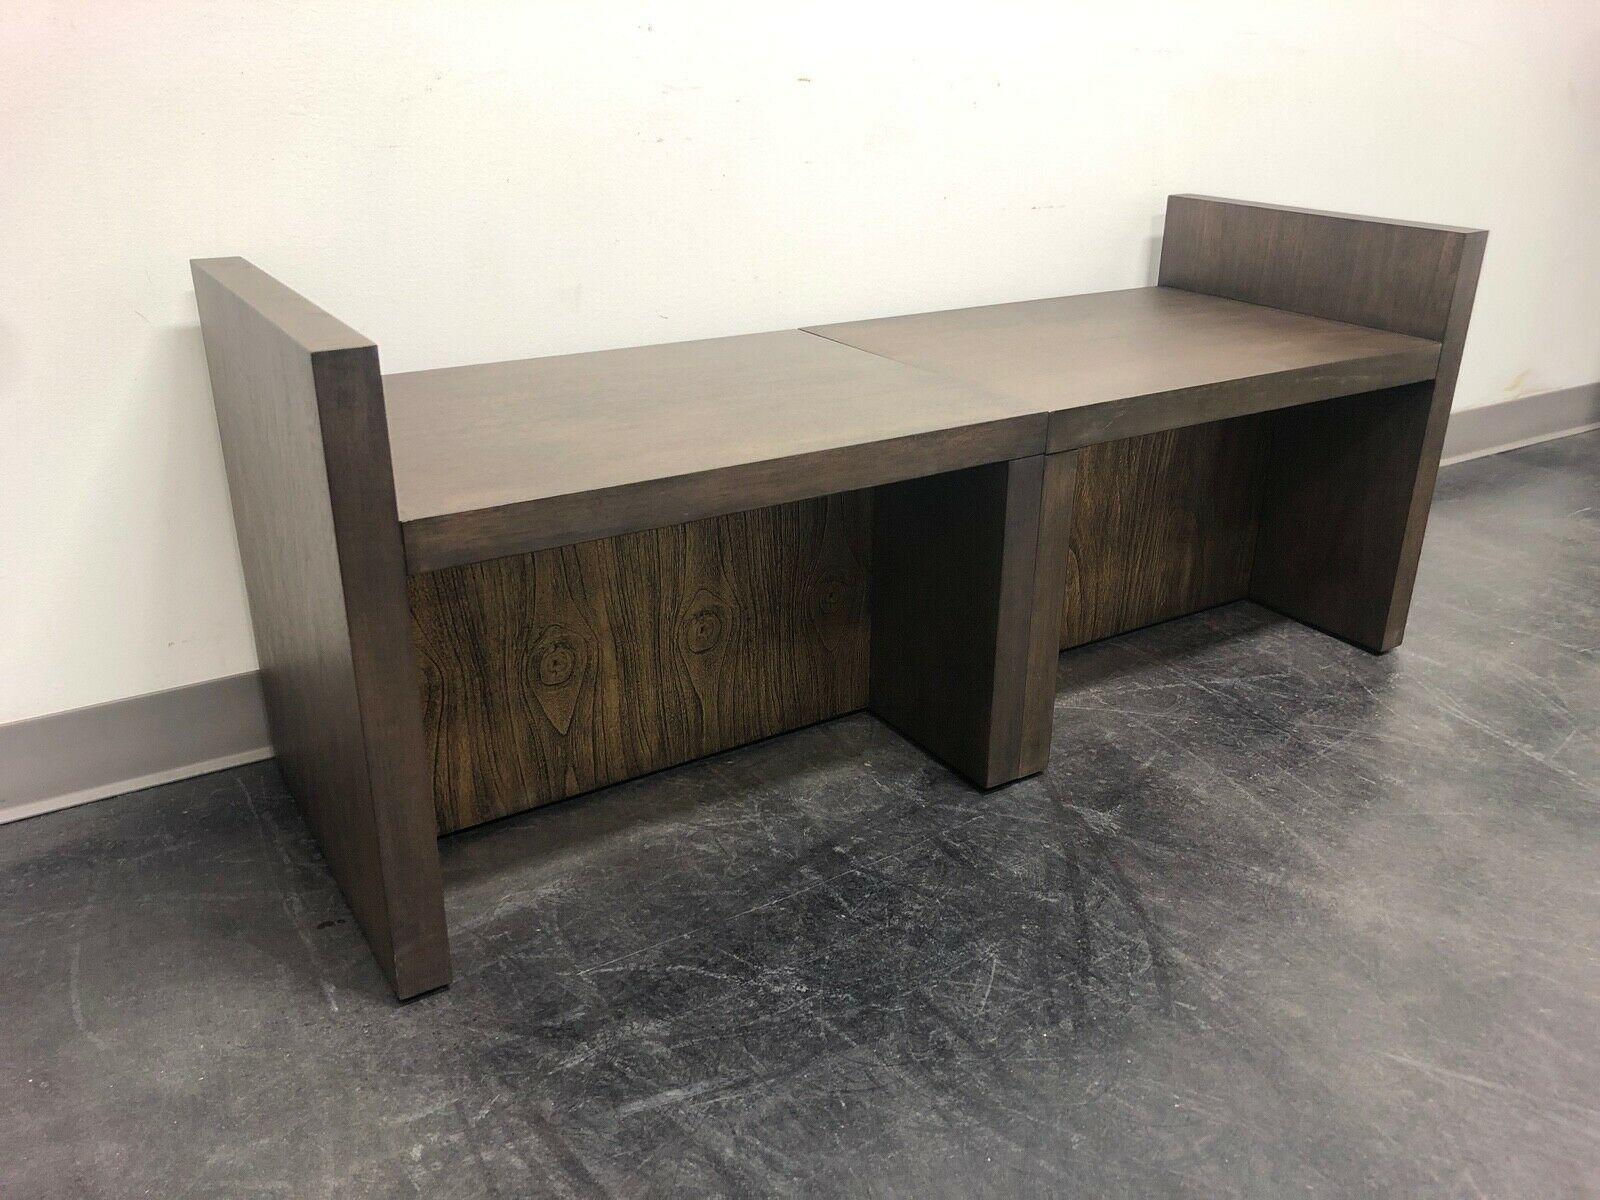 A pair of contemporary benches designed by Kara Mann for Baker Furniture, for their Milling Road line. Walnut. Simple cushions can be made to complement your existing decor. Made in the USA.

Baker Model #:  MR 7016

Measures:  Overall: 26w 18d 21h,